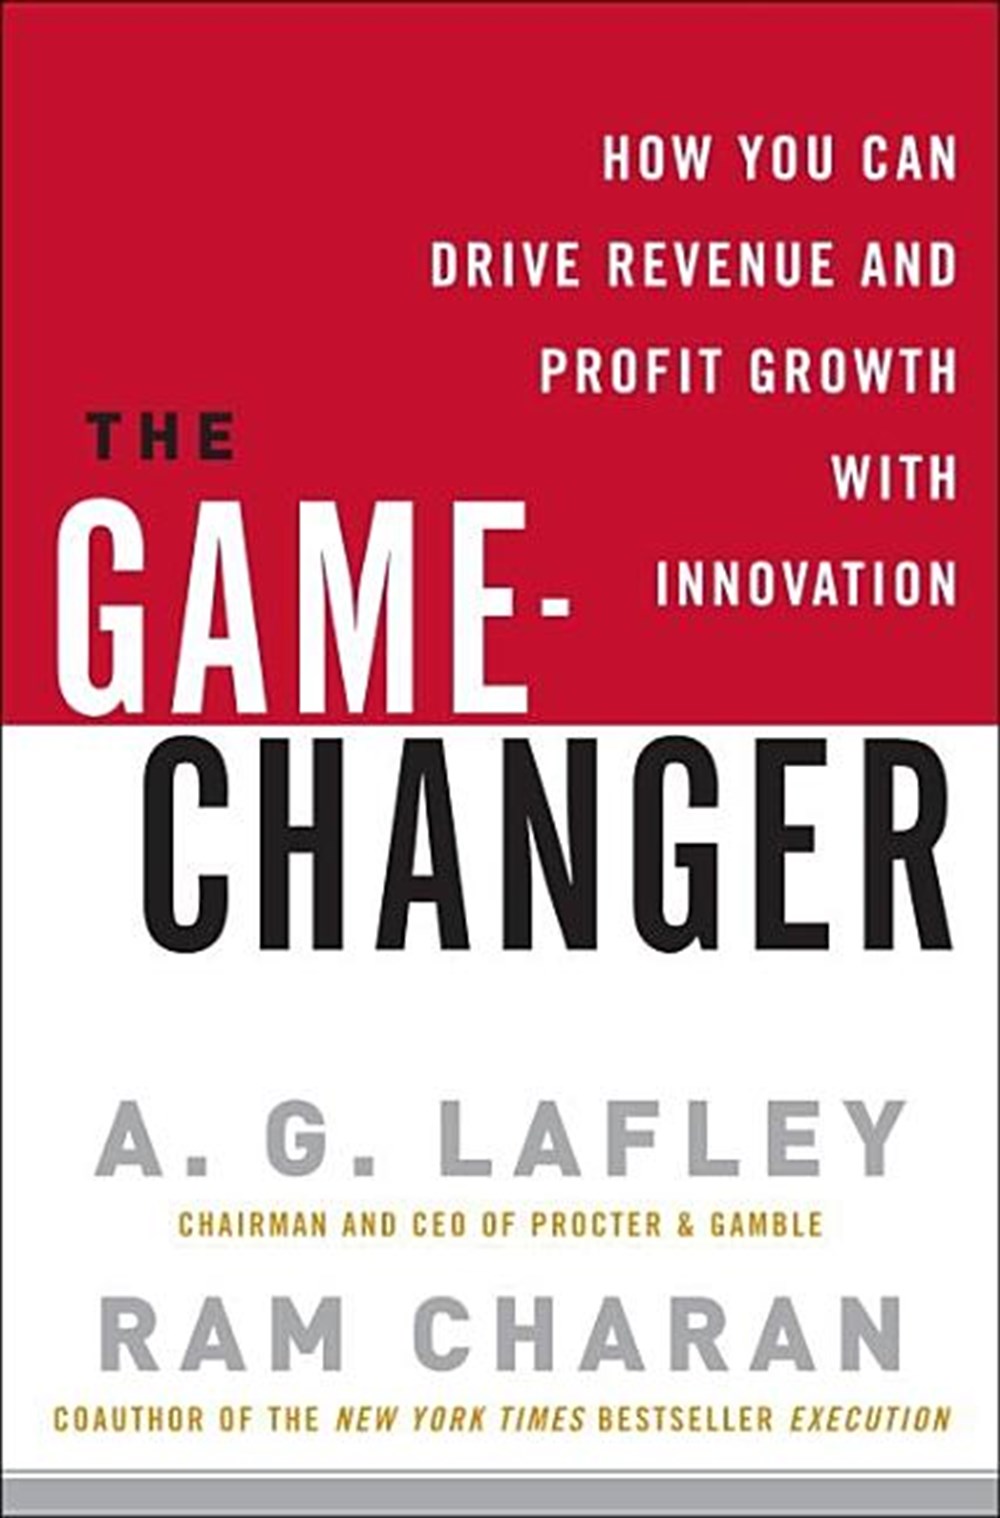 Game-Changer: How You Can Drive Revenue and Profit Growth with Innovation